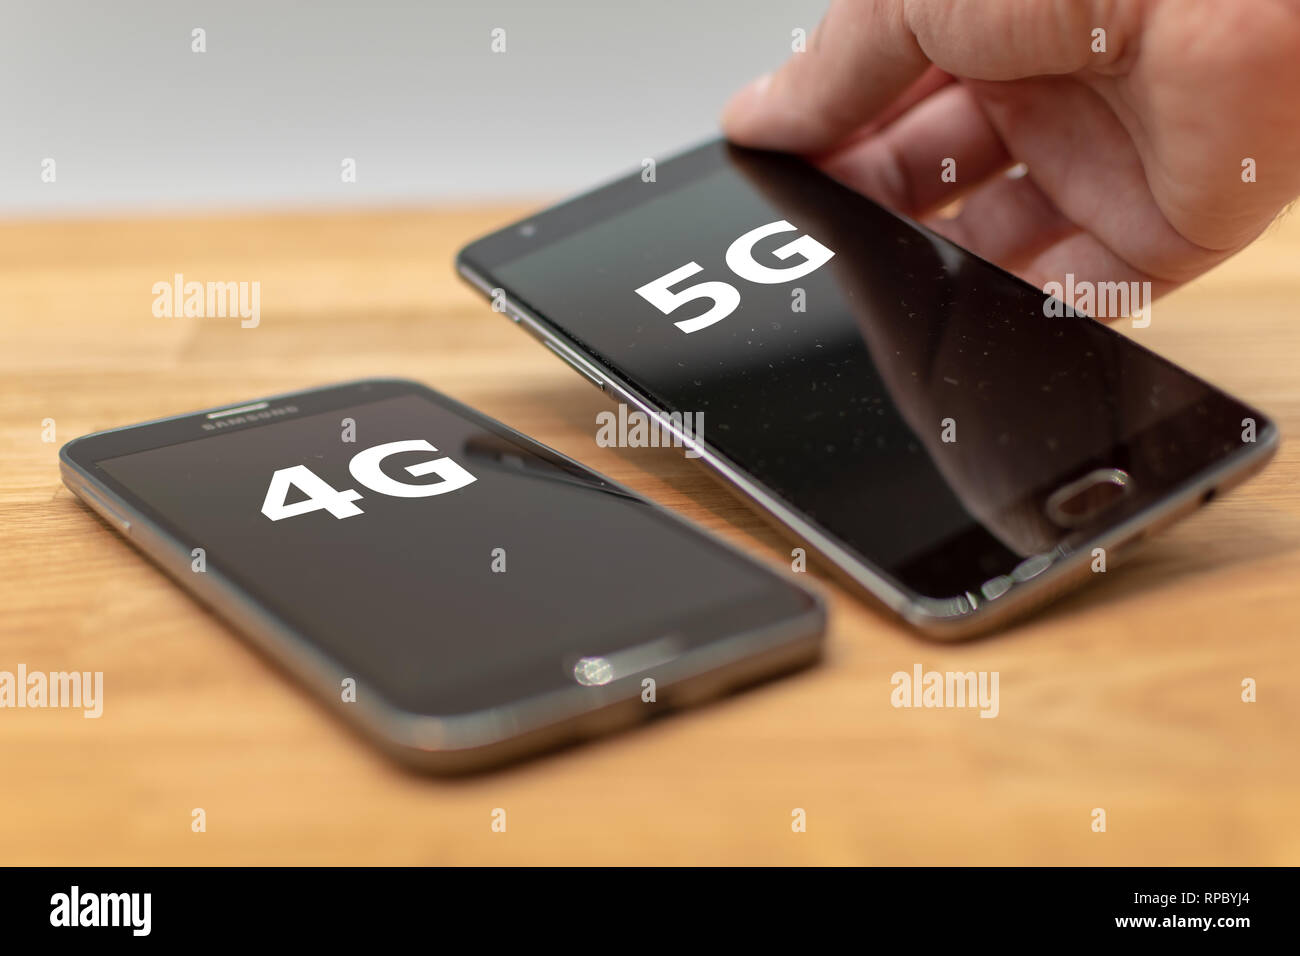 Two mobile phones on a wooden desk. Hand selects the phone with the label "5G" instead of the "4G" phone. Stock Photo